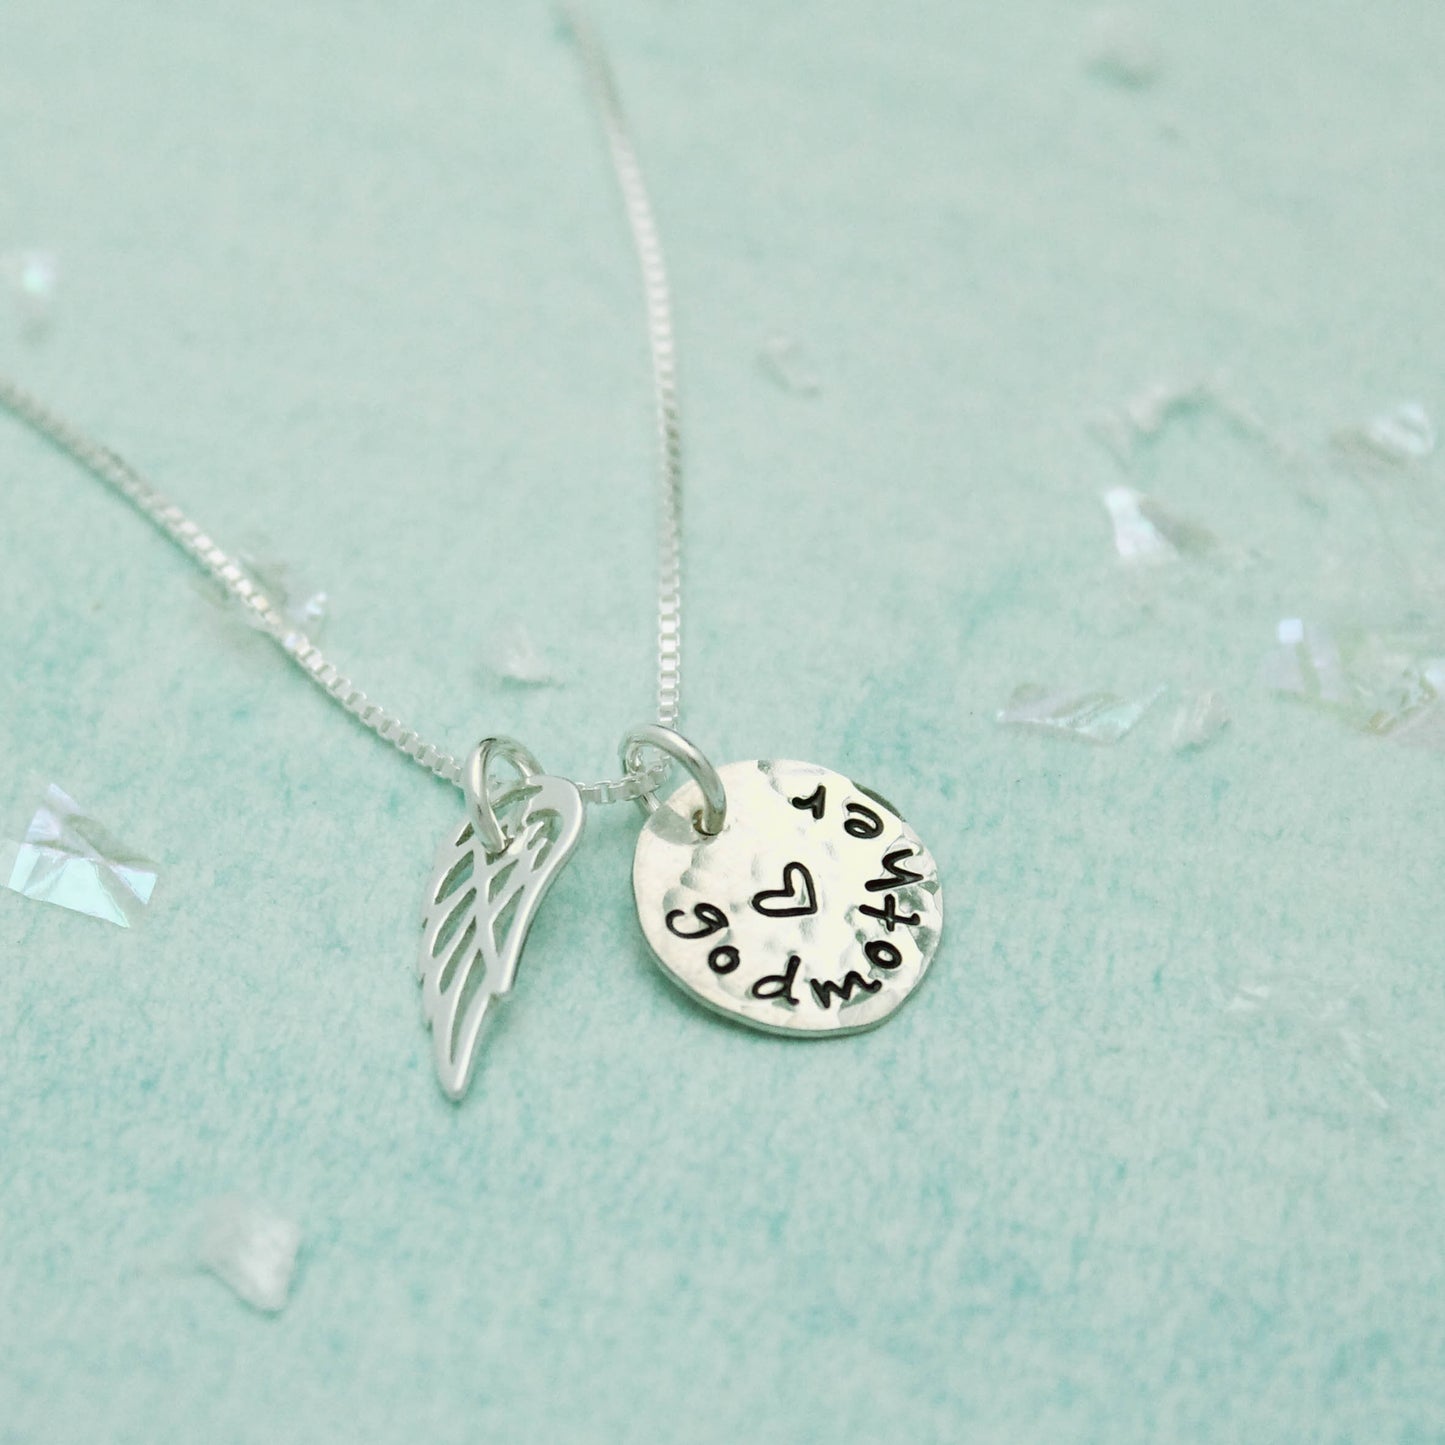 Godmother Necklace - Personalized and Hand Stamped - Cross and Angel Wing in Sterling Silver, Angel Wing Necklace, Unique Godmother Gift